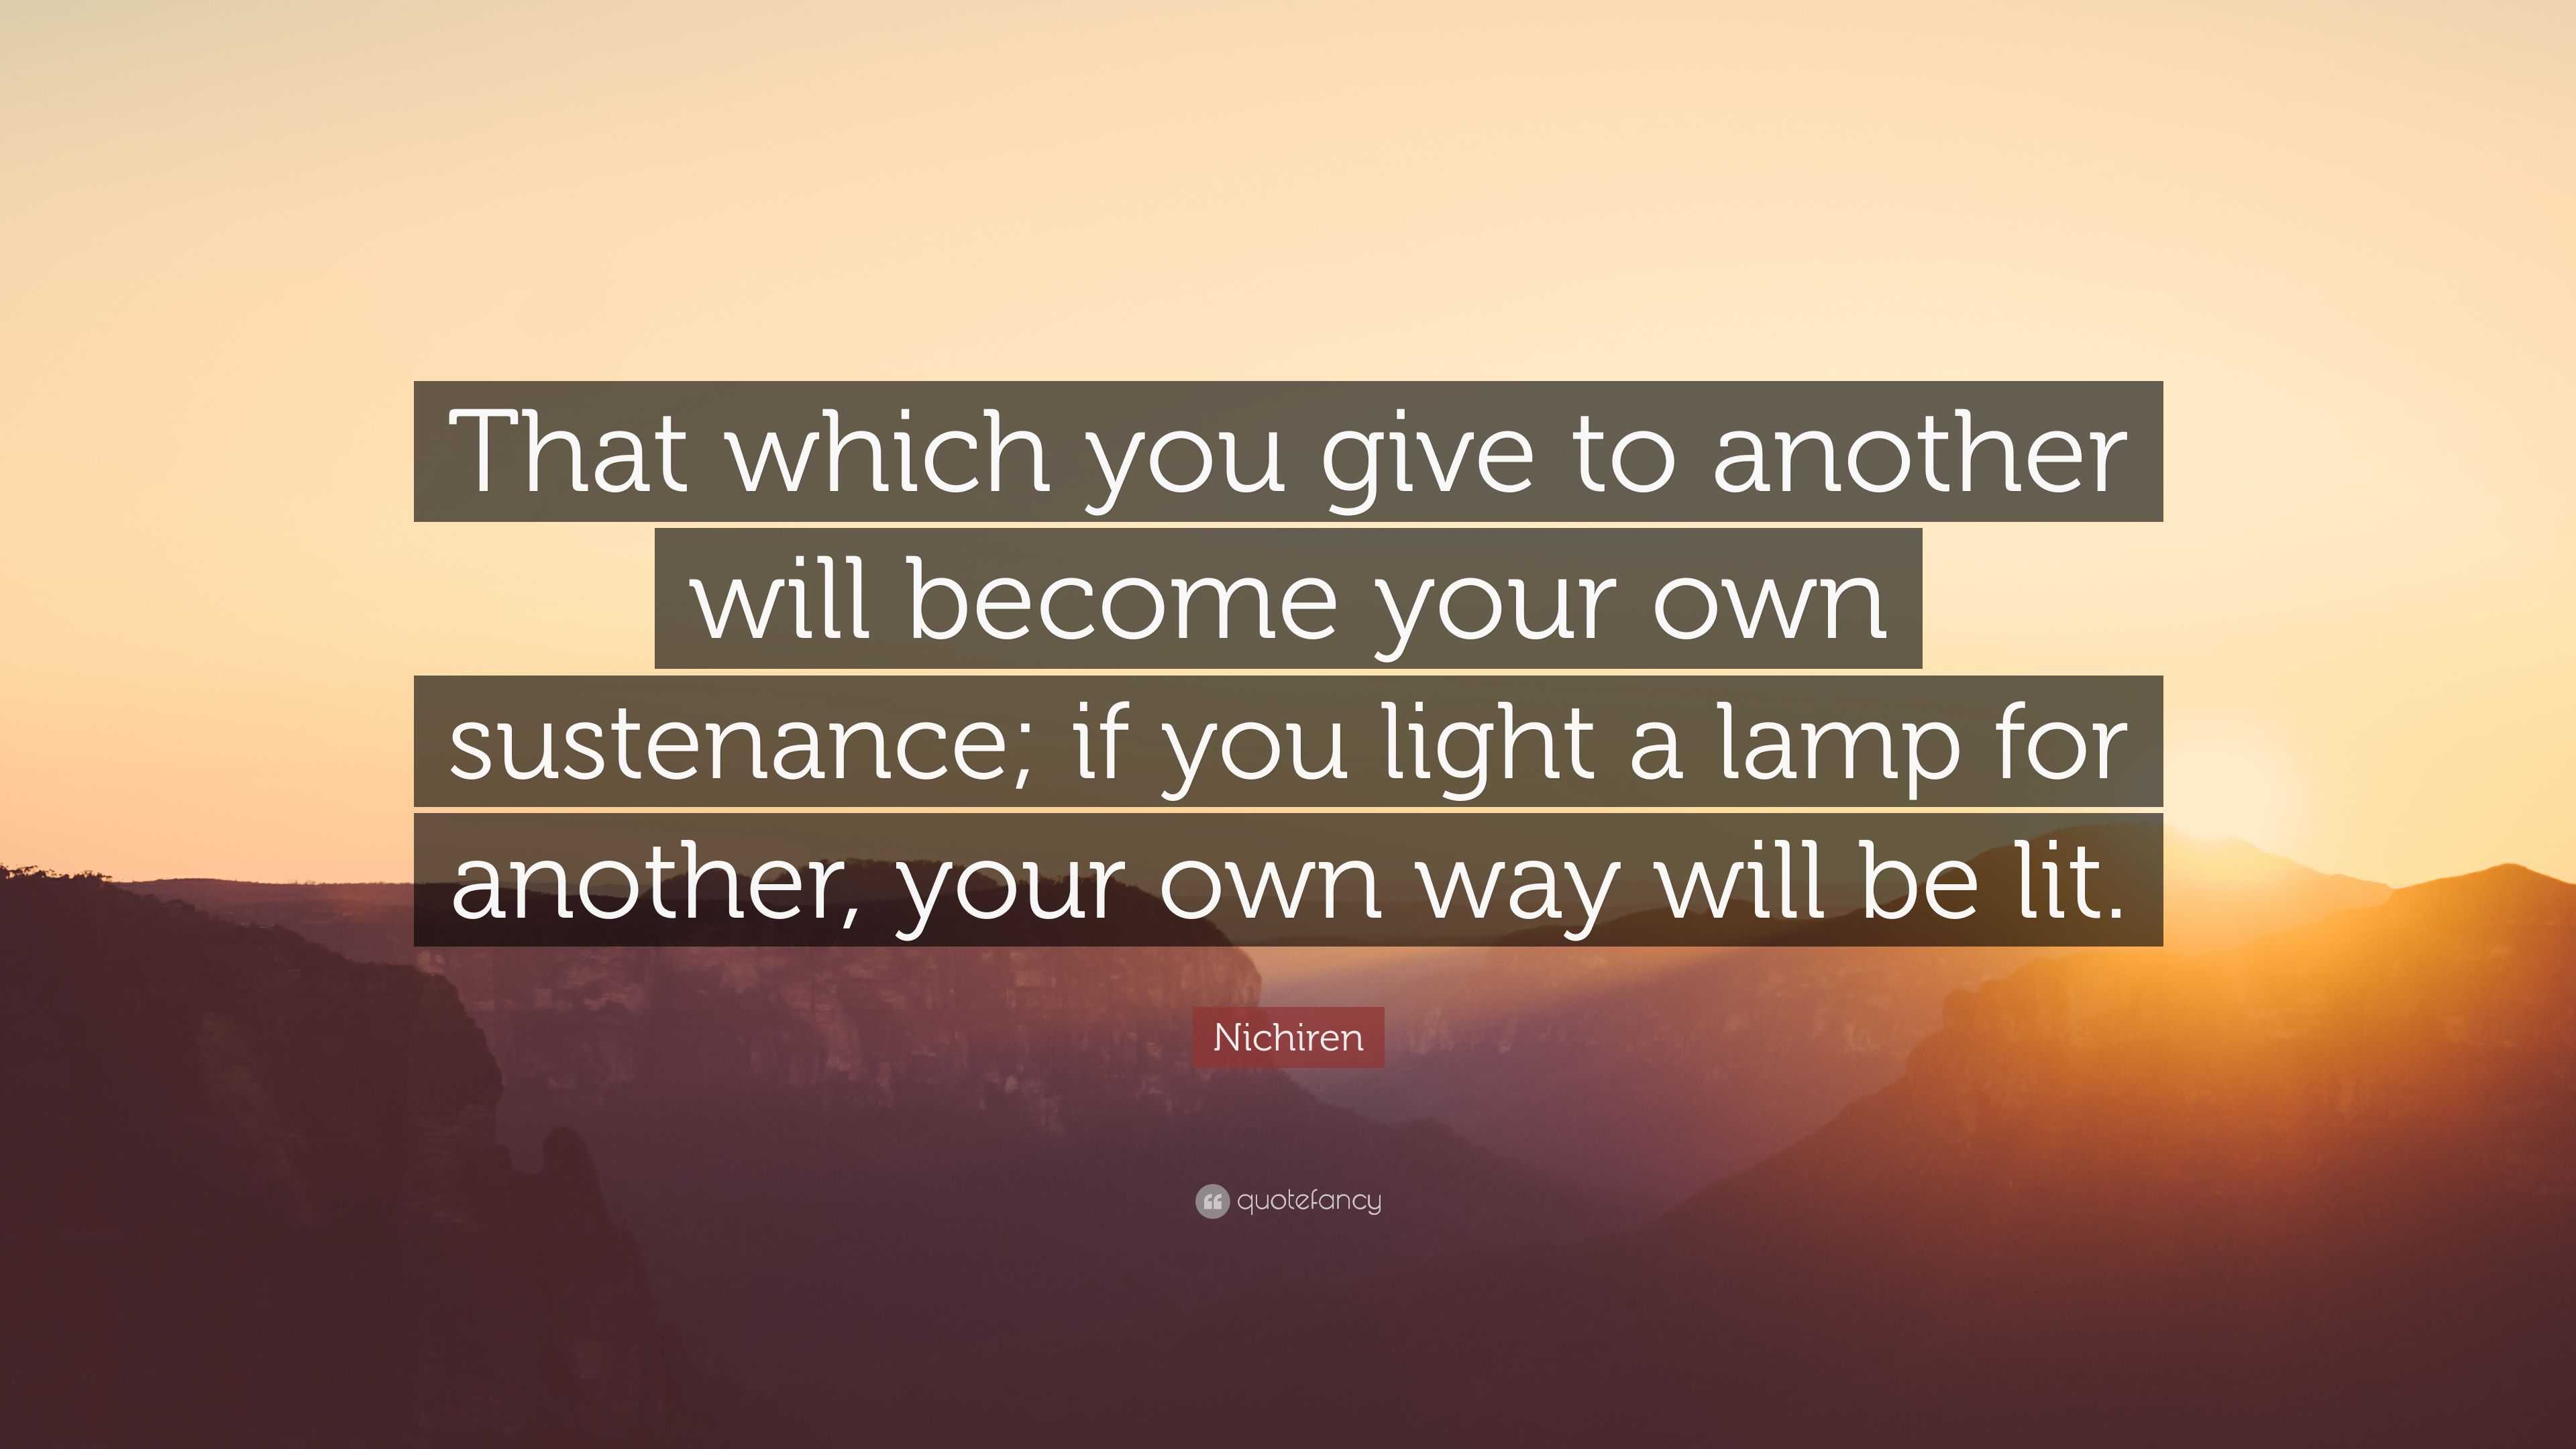 Nichiren Quote: “That which you give to will your sustenance; if light a lamp for another, your own way will be li...”